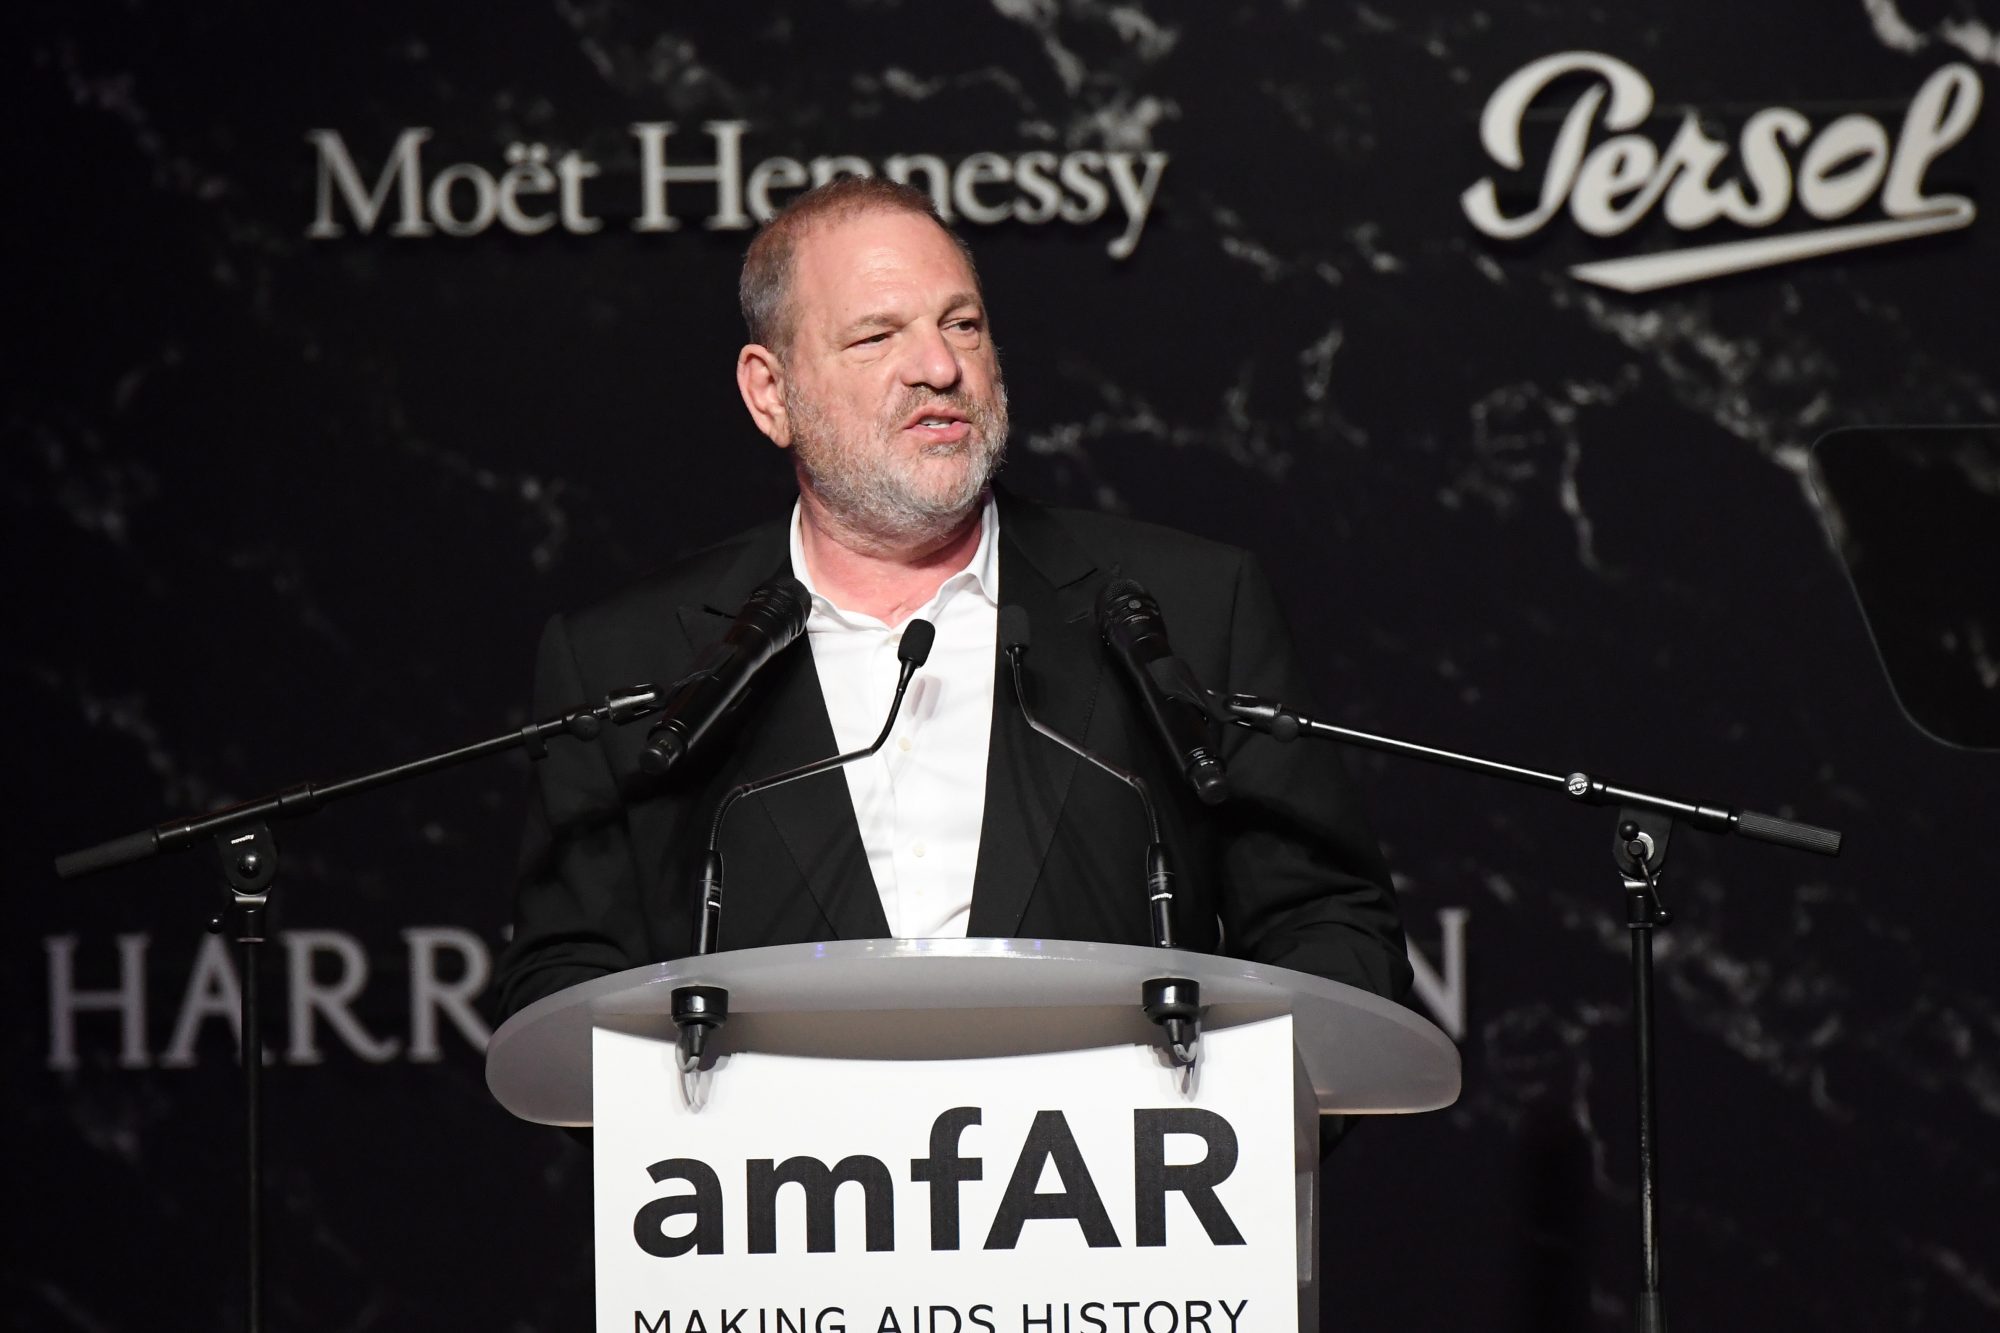 CAP D'ANTIBES, FRANCE - MAY 25:  Harvey Weinstein speaks on stage during the amfAR Gala Cannes 2017 at Hotel du Cap-Eden-Roc on May 25, 2017 in Cap d'Antibes, France.  (Photo by Dominique Charriau/Getty Images)